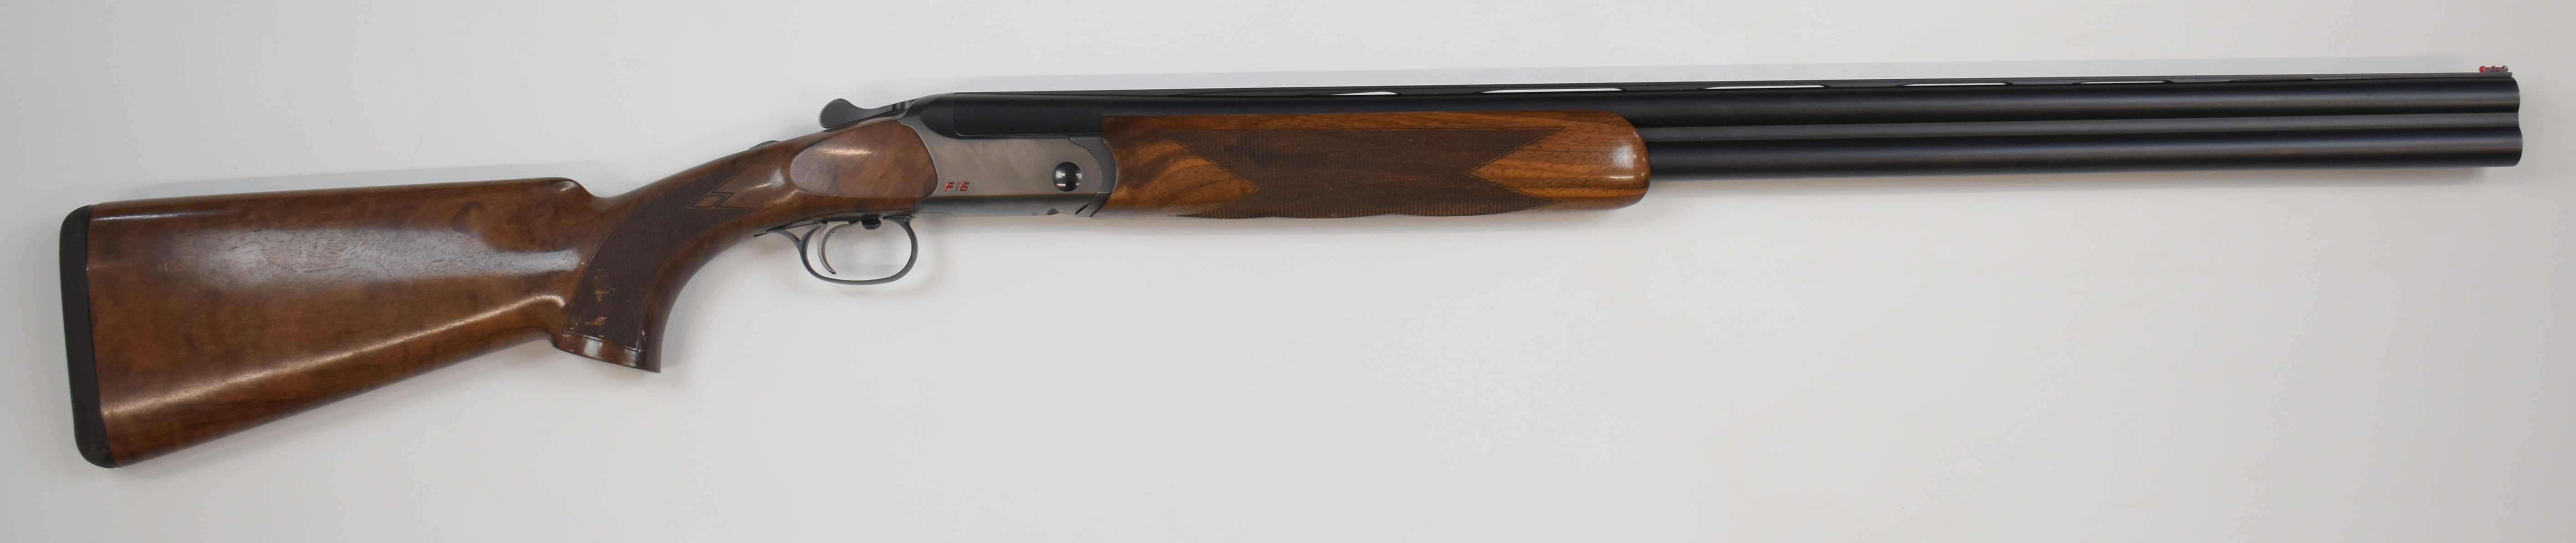 Blaser F16 12 bore over under ejector shotgun with named locks and underside, chequered semi- - Image 13 of 22